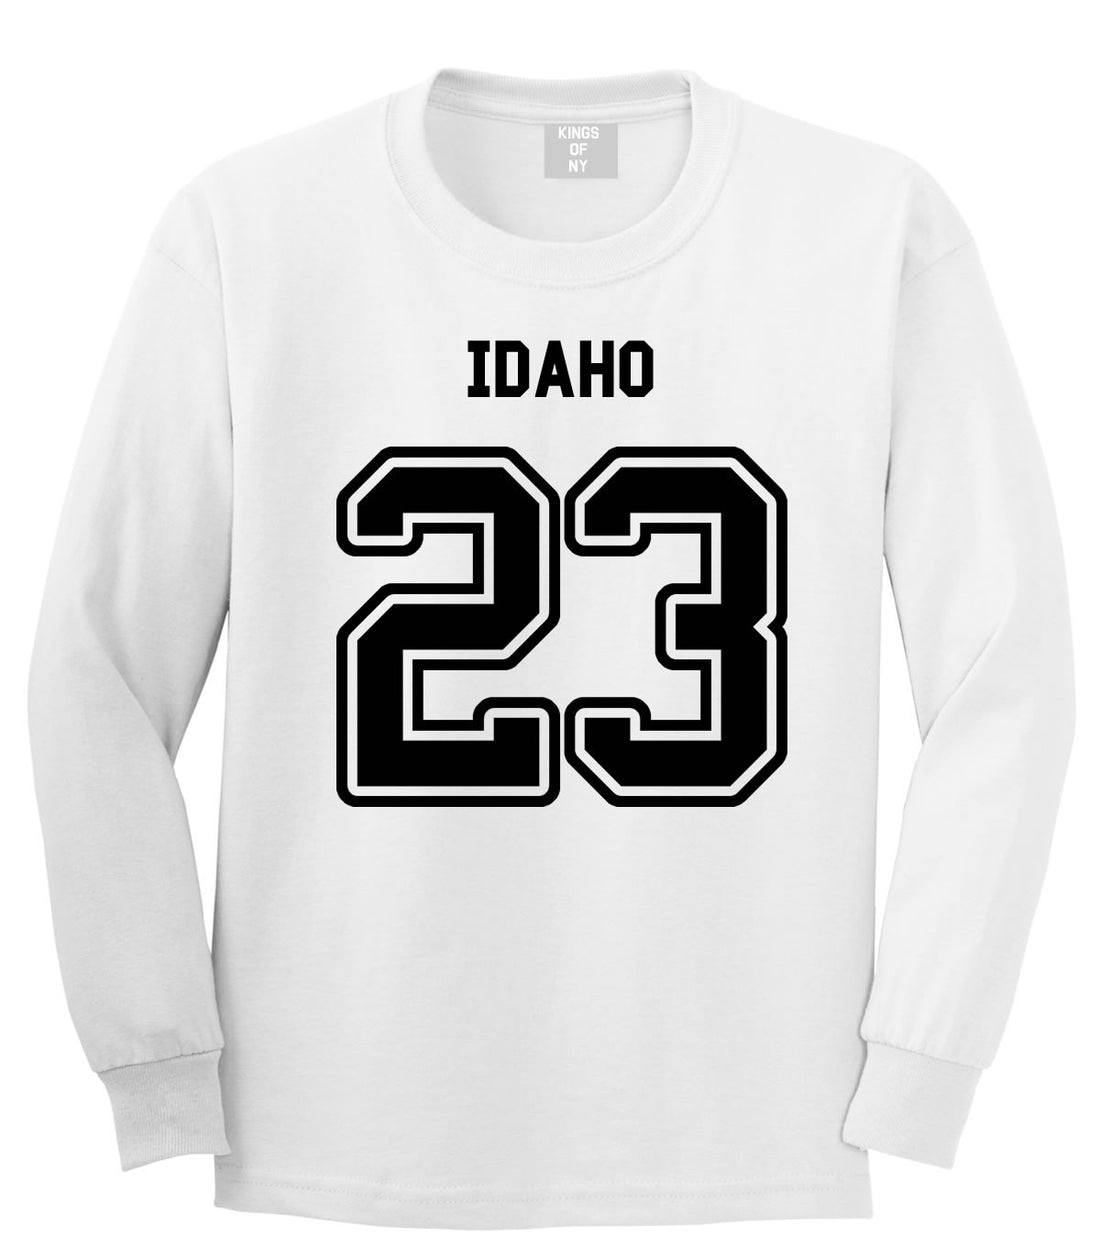 Sport Style Idaho 23 Team State Jersey Long Sleeve T-Shirt By Kings Of NY